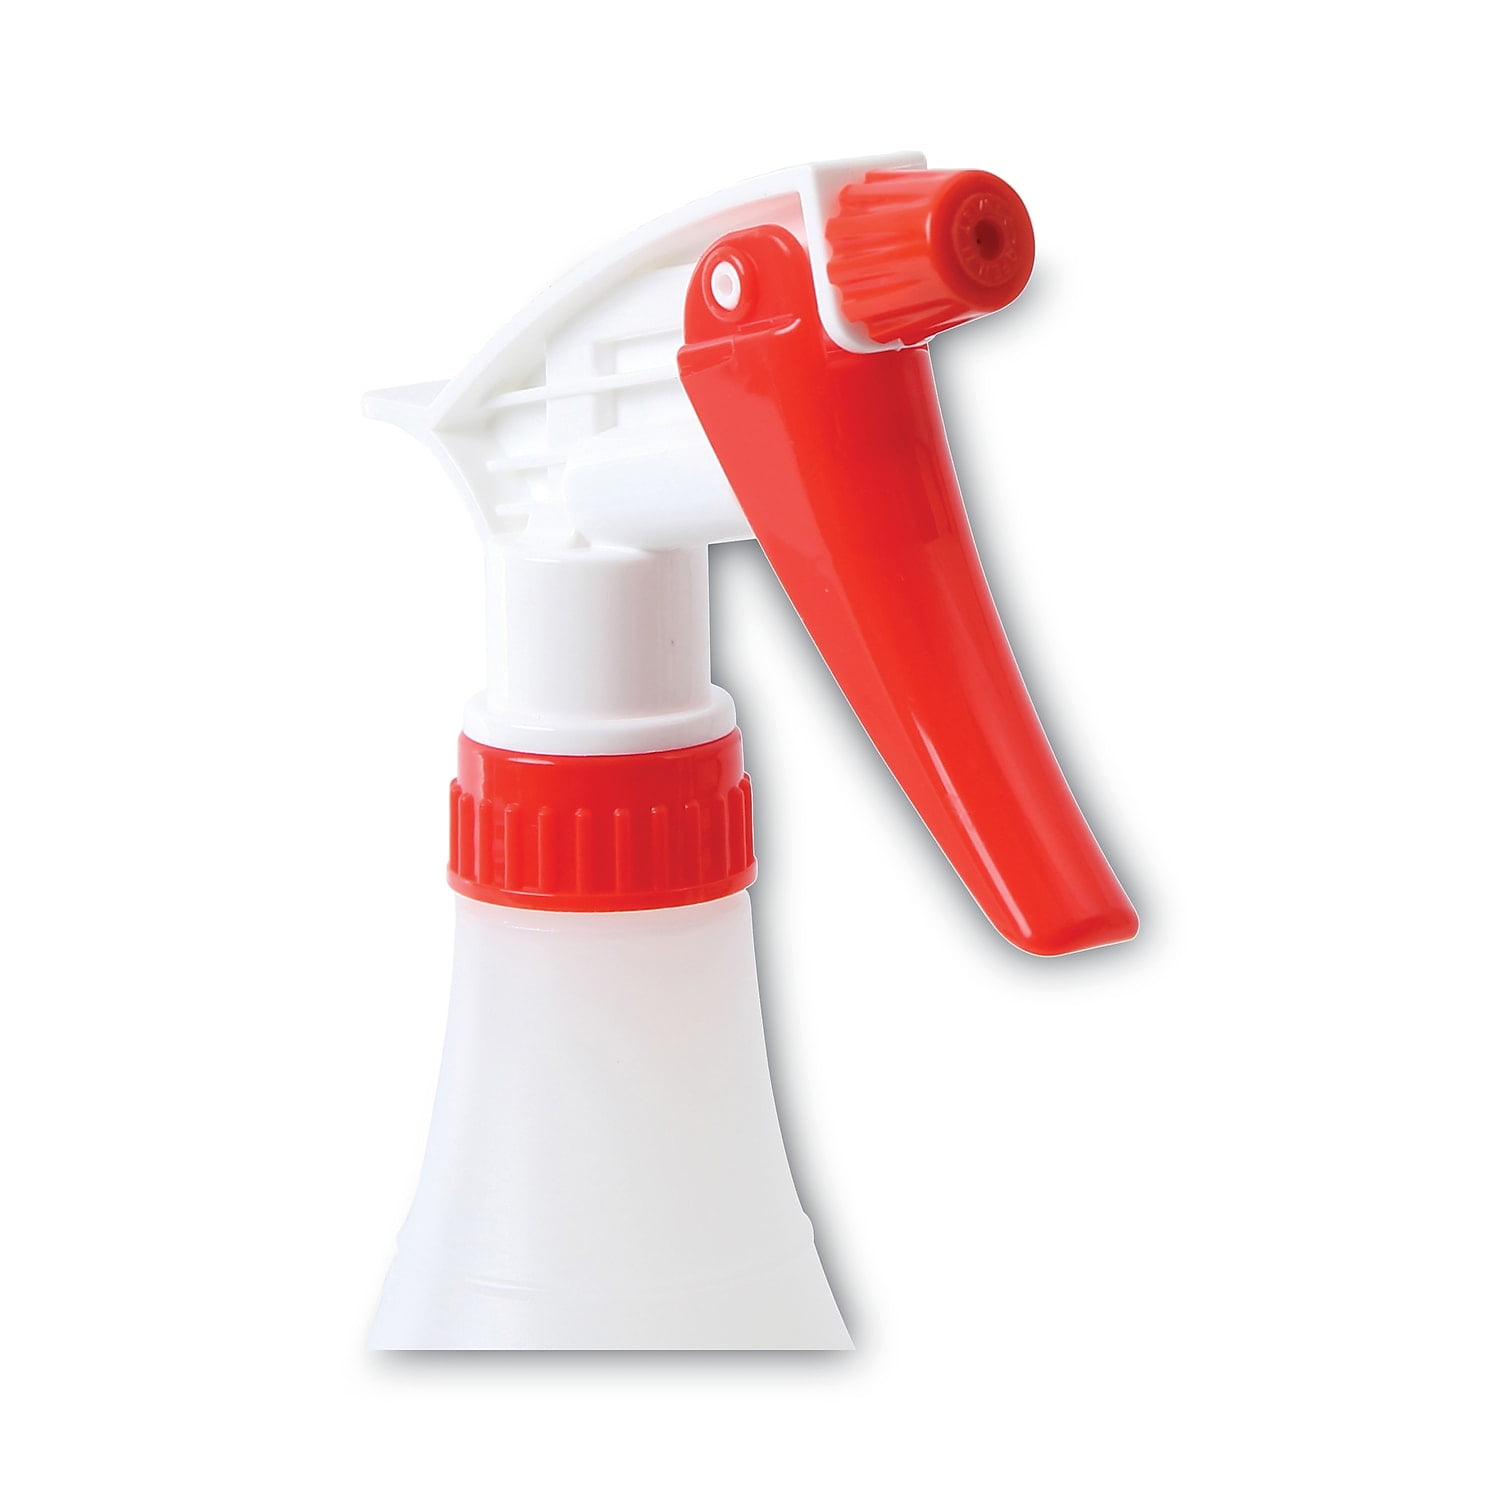 Rubbermaid Commercial 32-oz Trigger Spray Bottle - Suitable For Cleaning -  Heavy Duty - 9.6 Height - 3.4 Width - 6 / Carton - Clear